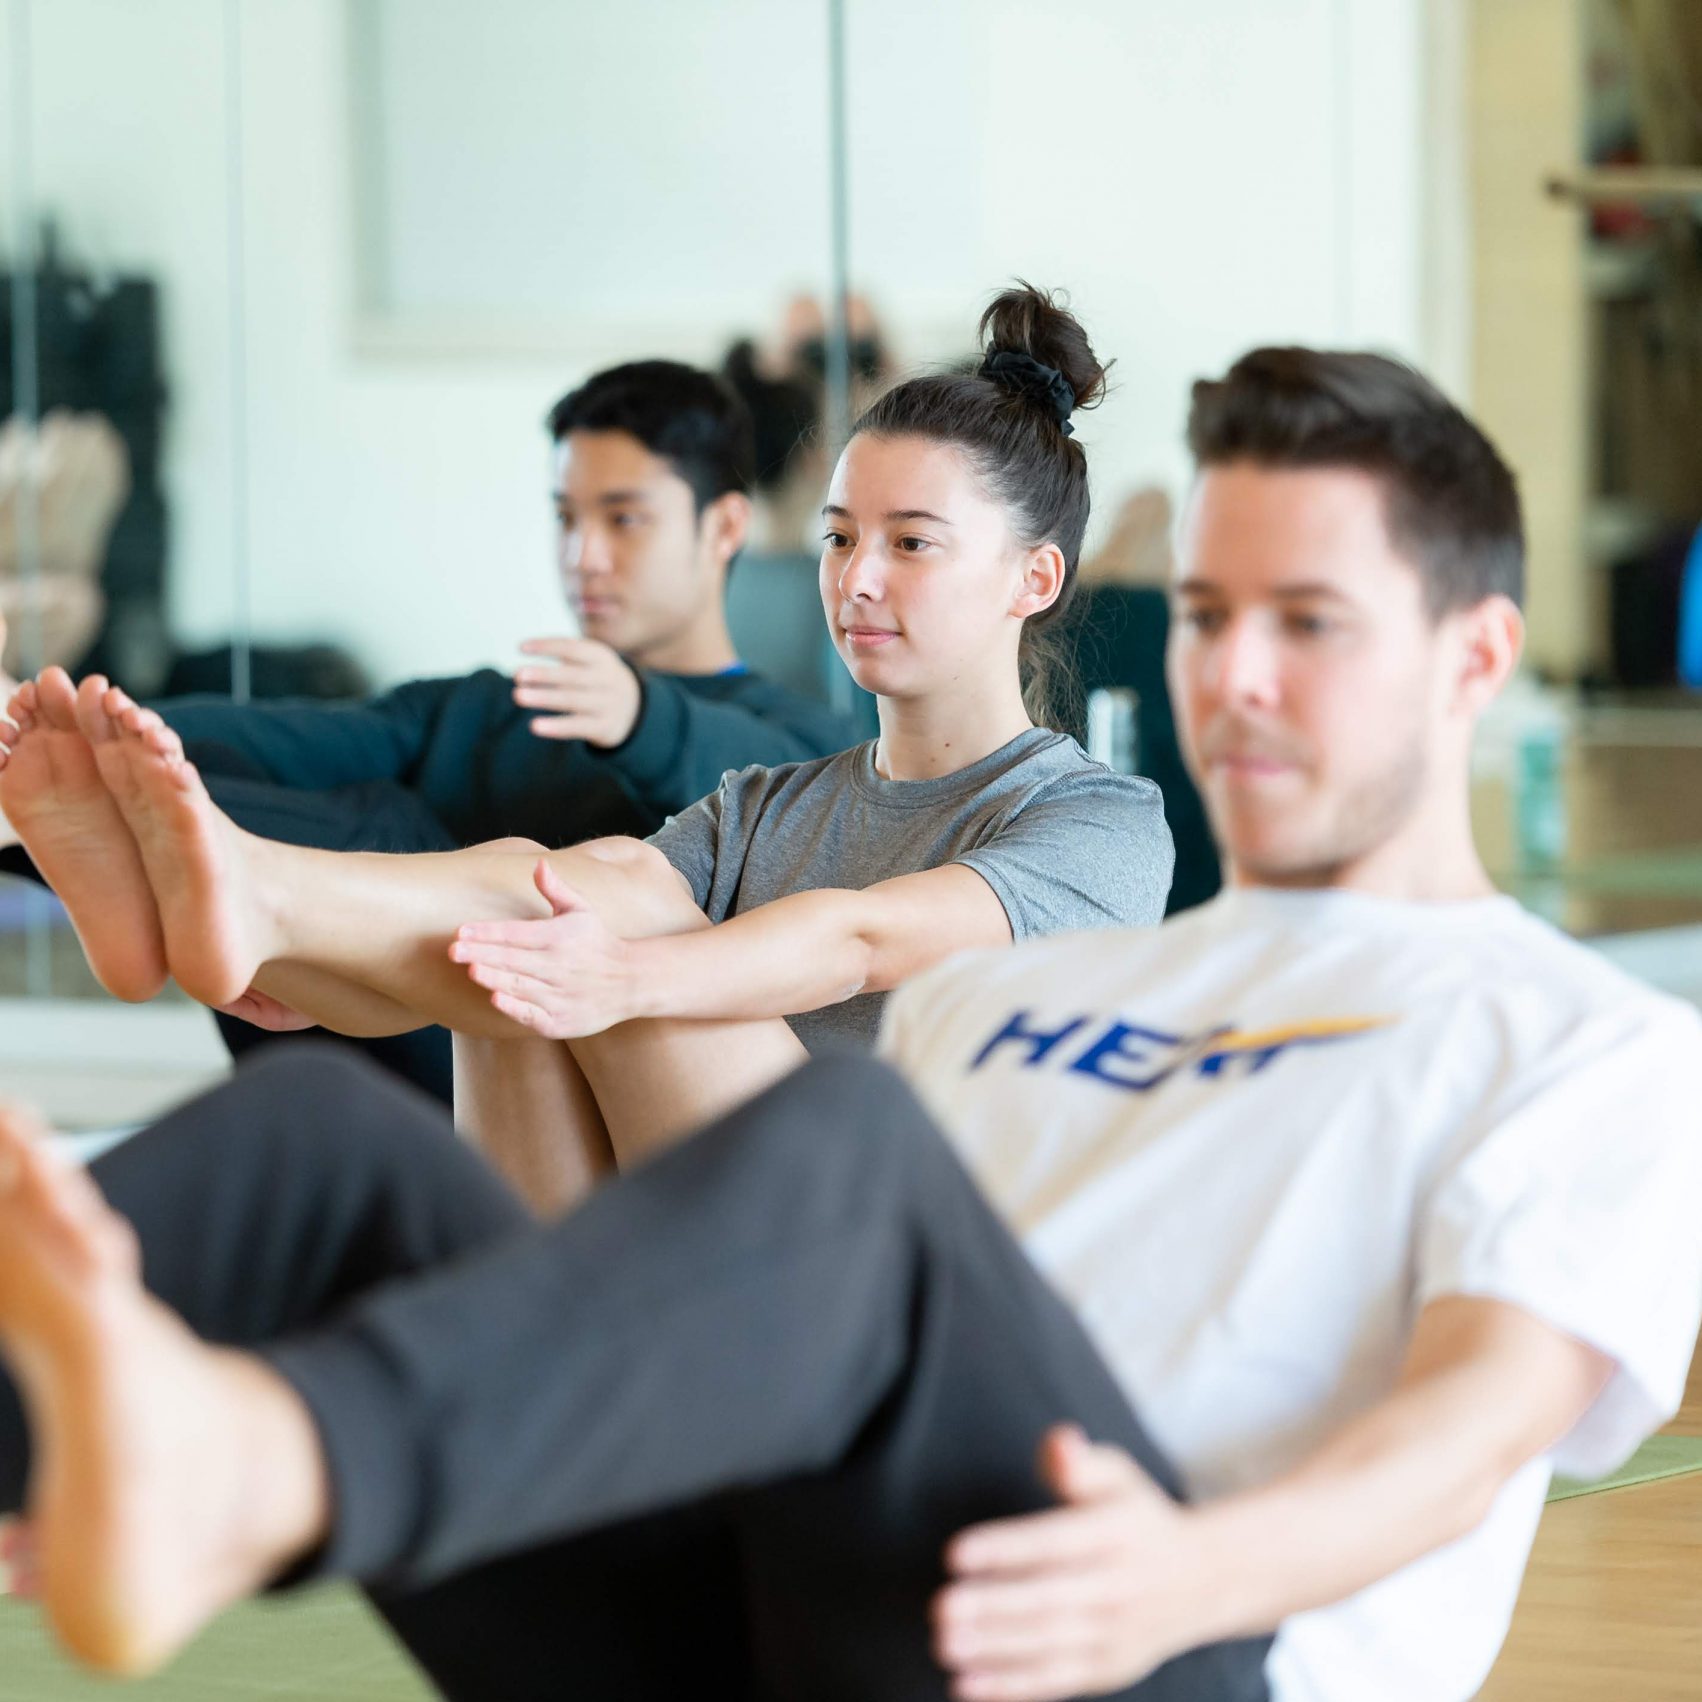 Students in a yoga class performing a seated core exercise.